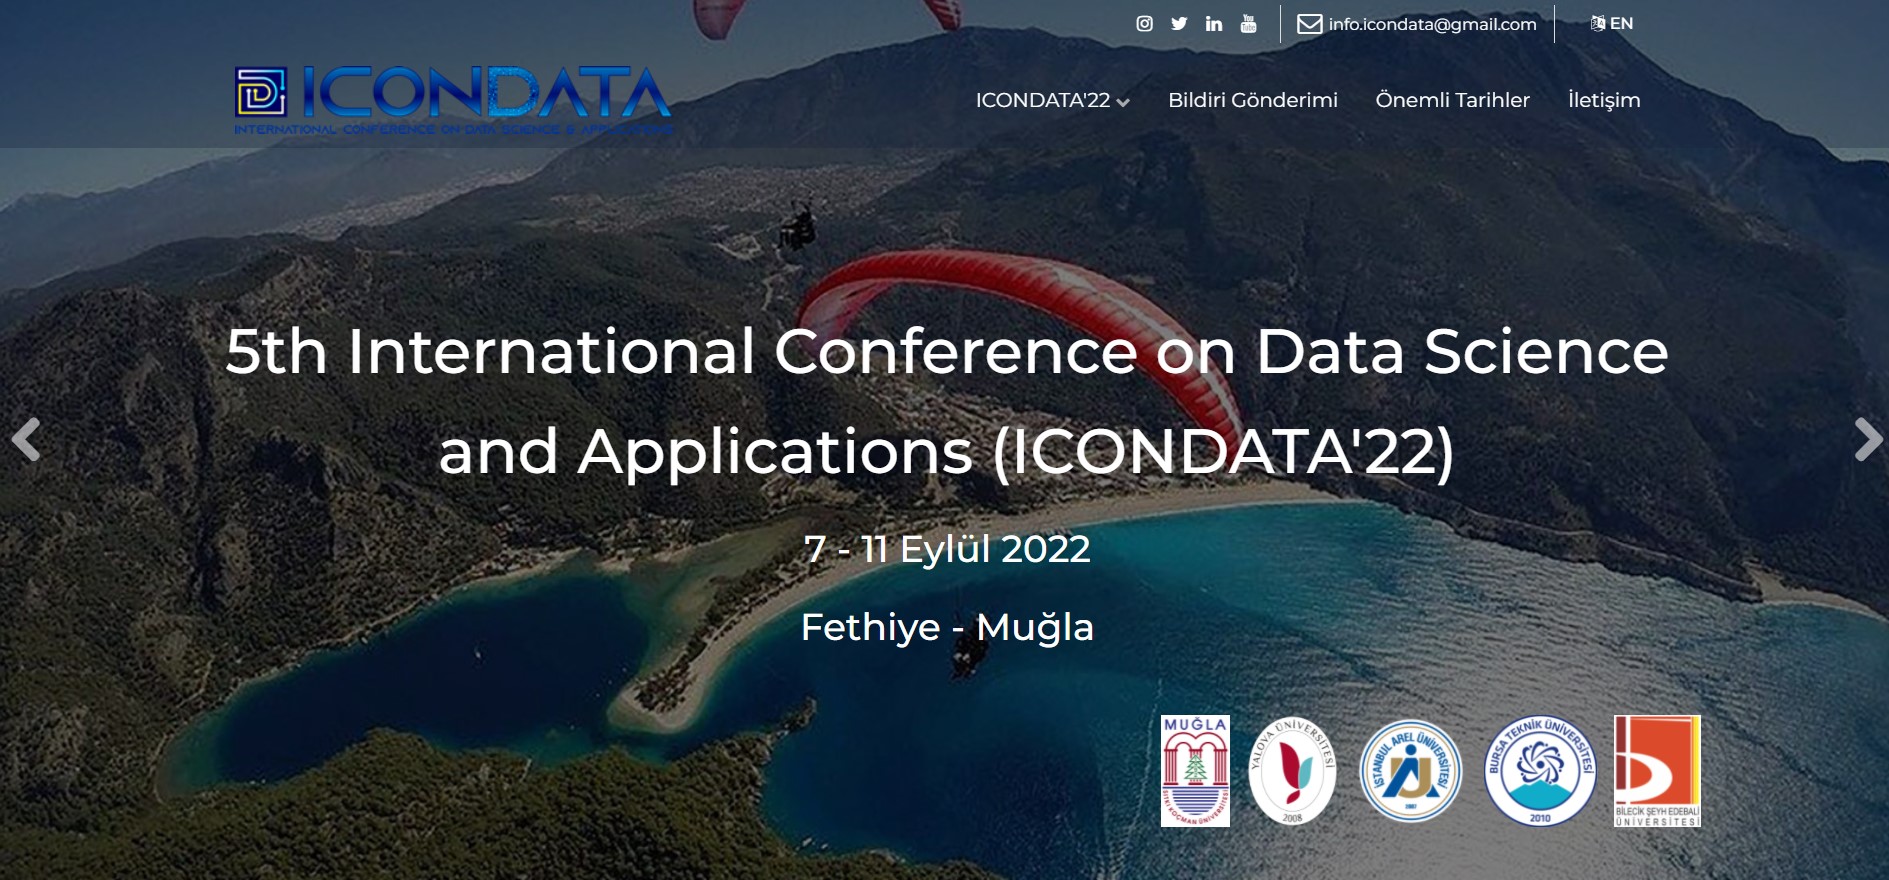 5. International Conference on Data Science and Applications ICONDATA'22